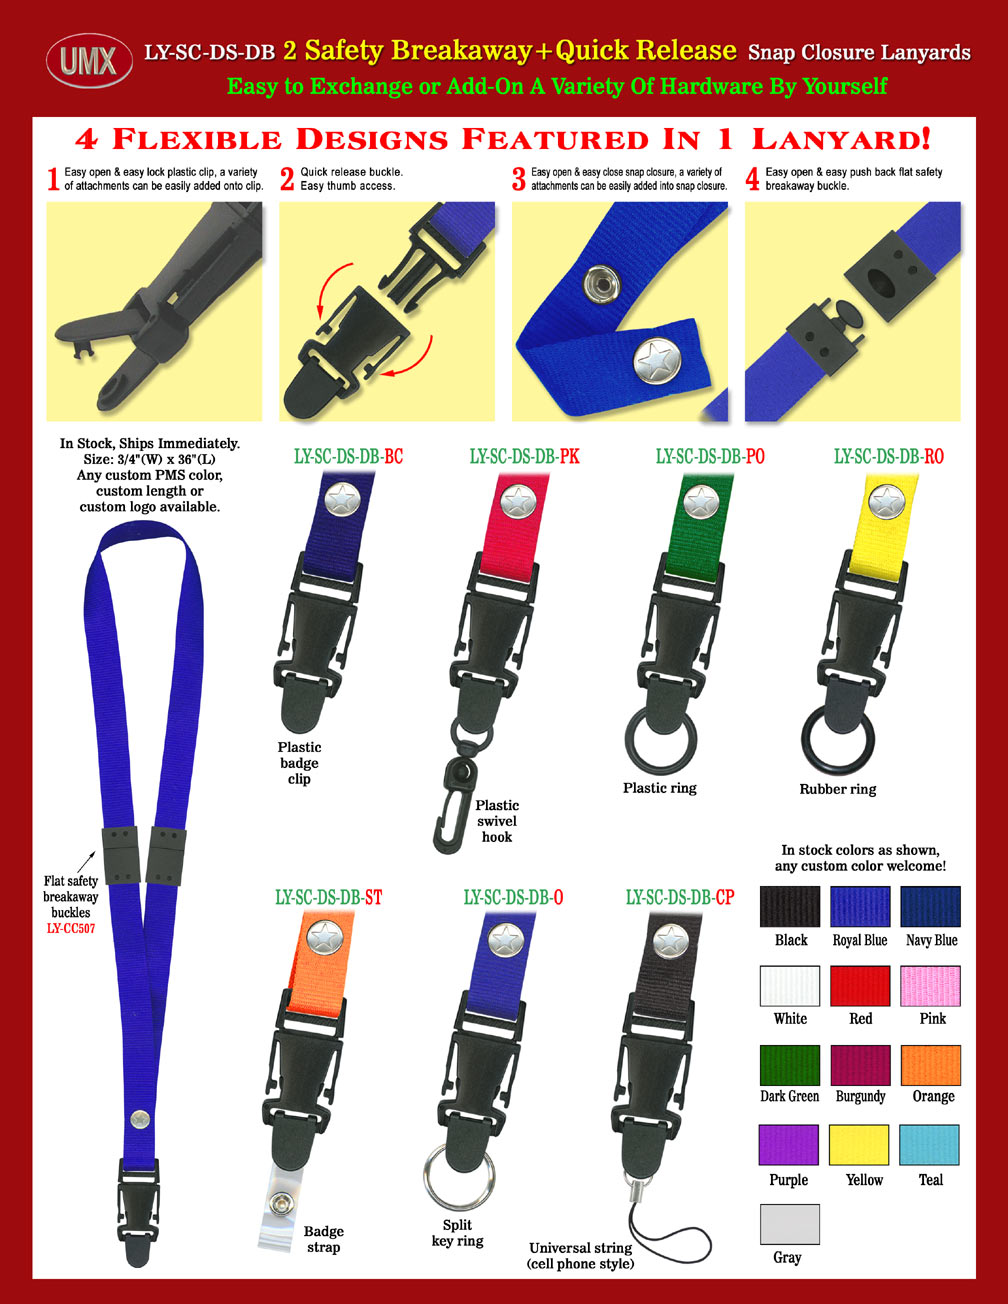 Double Safety Snap-On Lanyards with Quick Release Buckles - 3/4"  Snap-On Lanyards With Two Safety Breakaway.